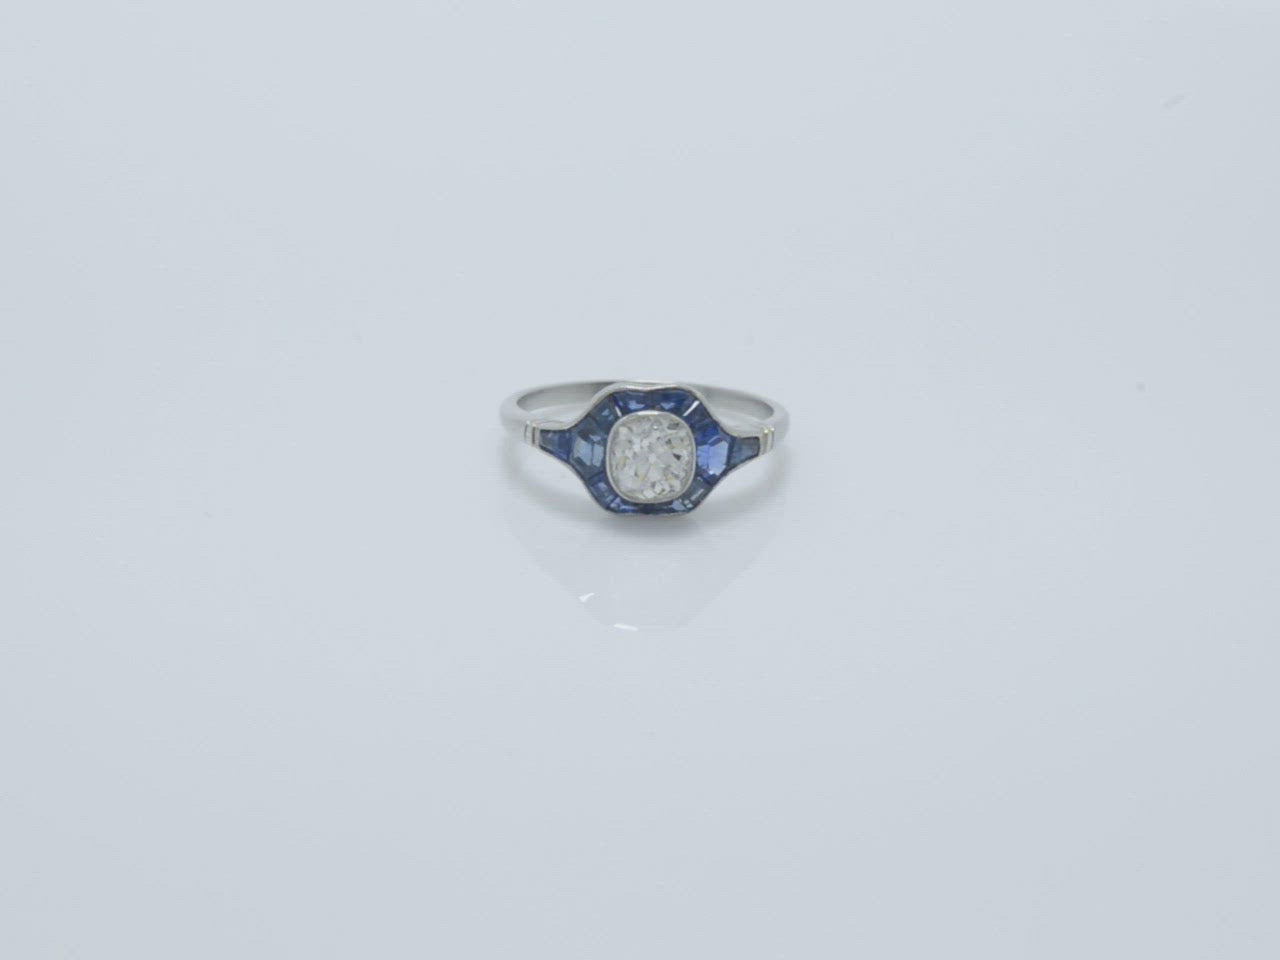 A 1 carat old mine cushion diamond wedding ring with French cut blue sapphires in the halo.